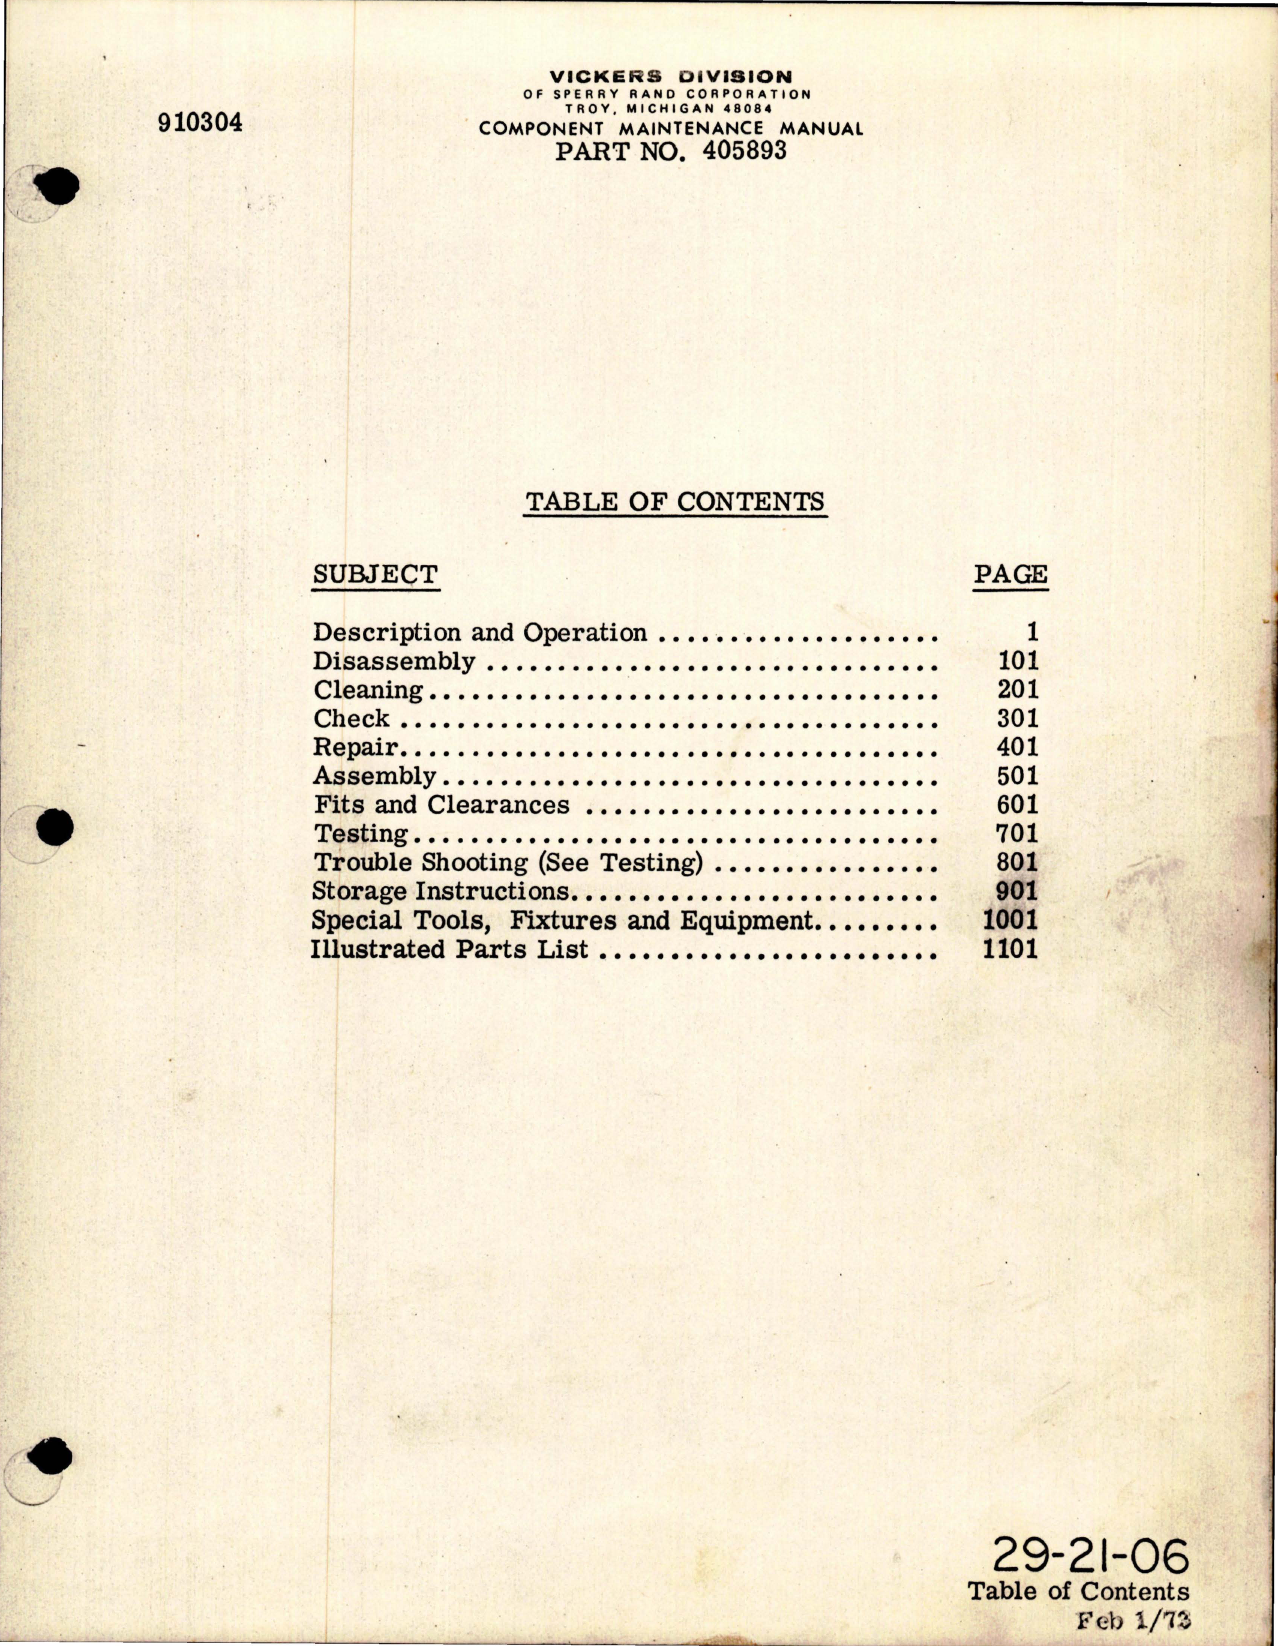 Sample page 5 from AirCorps Library document: Component Maintenance Manuals for Hydraulic Motorpump - Parts 405893 and 414470 